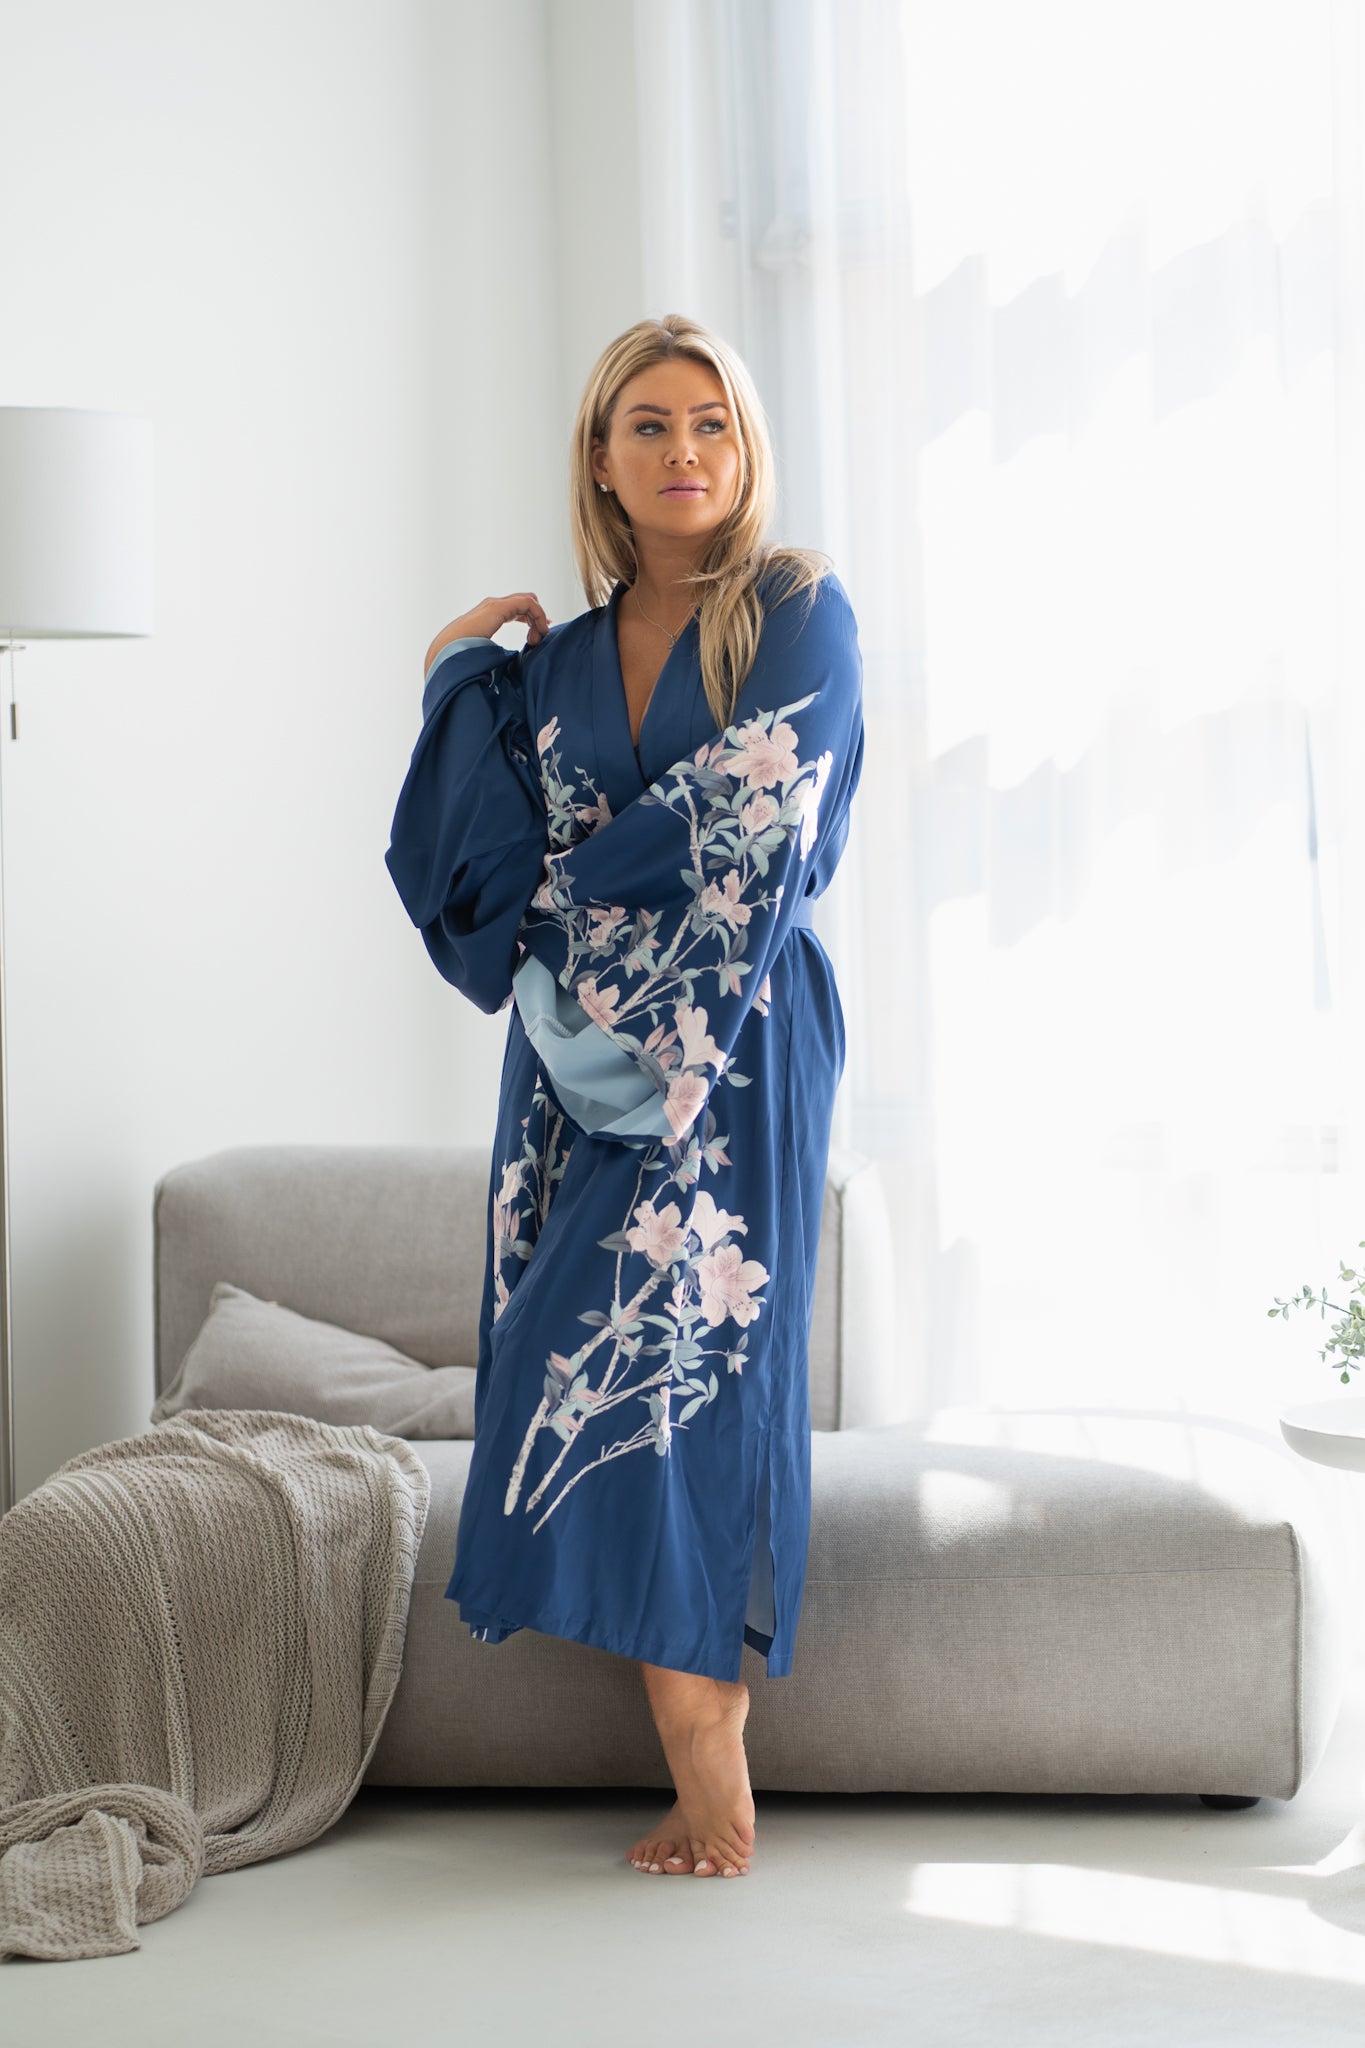 Woman wearing long navy blue floral robe with belt standing near couch, Shop TKS